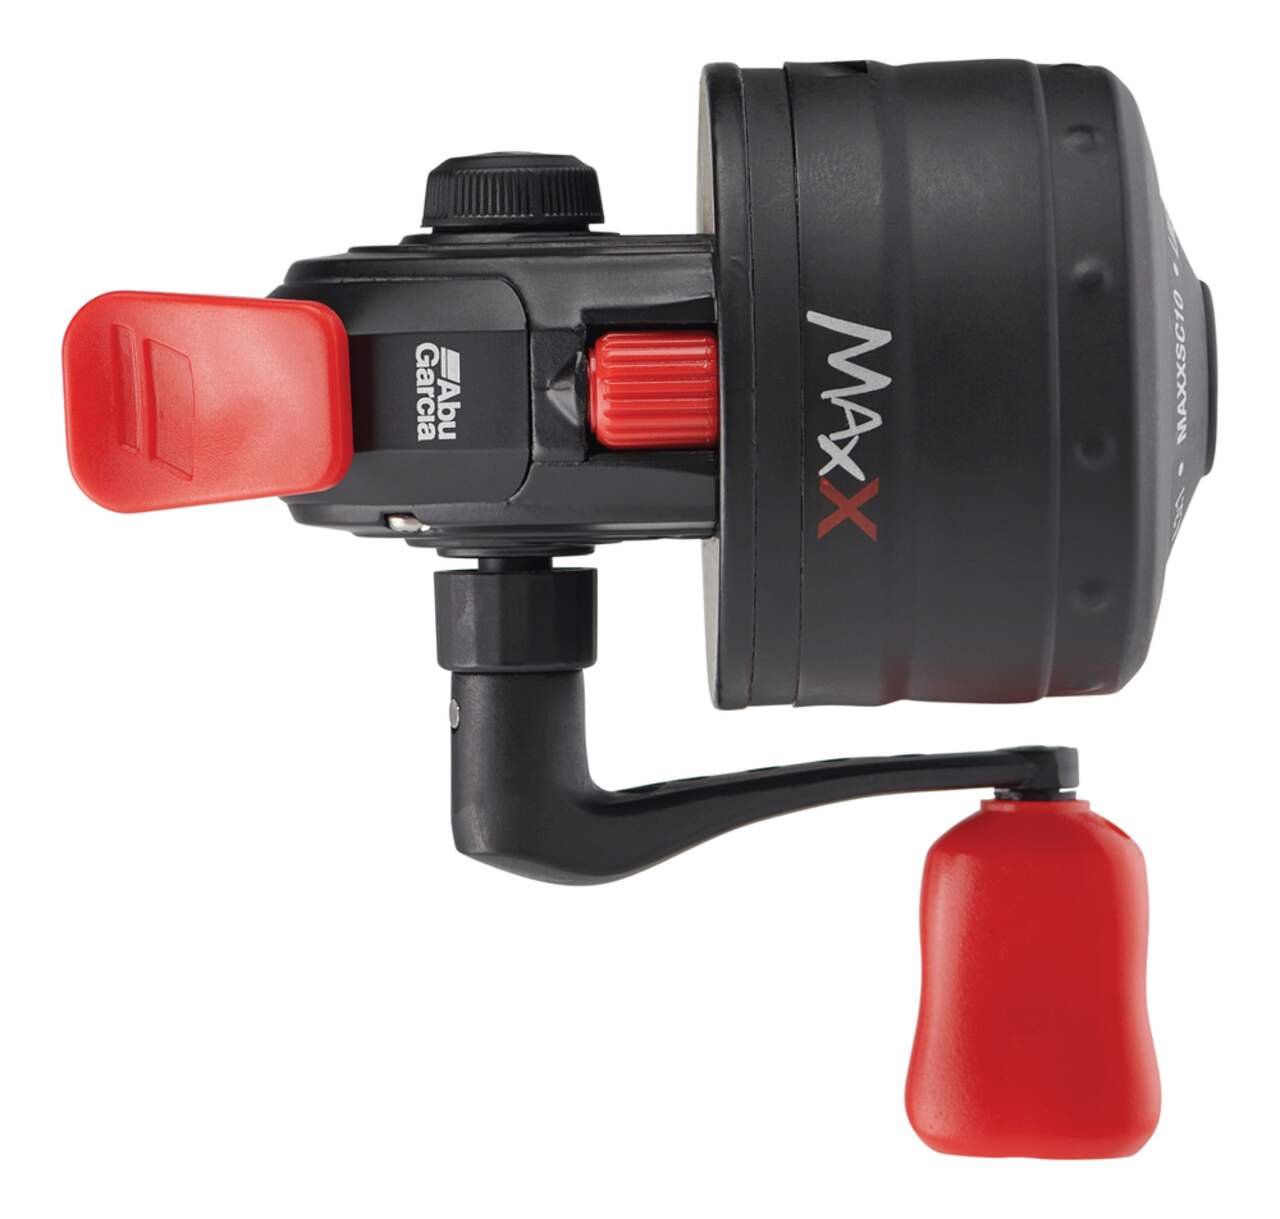 https://media-www.canadiantire.ca/product/playing/fishing/fishing-equipment/0772687/abu-garcia-max-spincast-reel-size-10-c47116b0-9697-4104-ae44-4f0e514131df.png?imdensity=1&imwidth=640&impolicy=mZoom